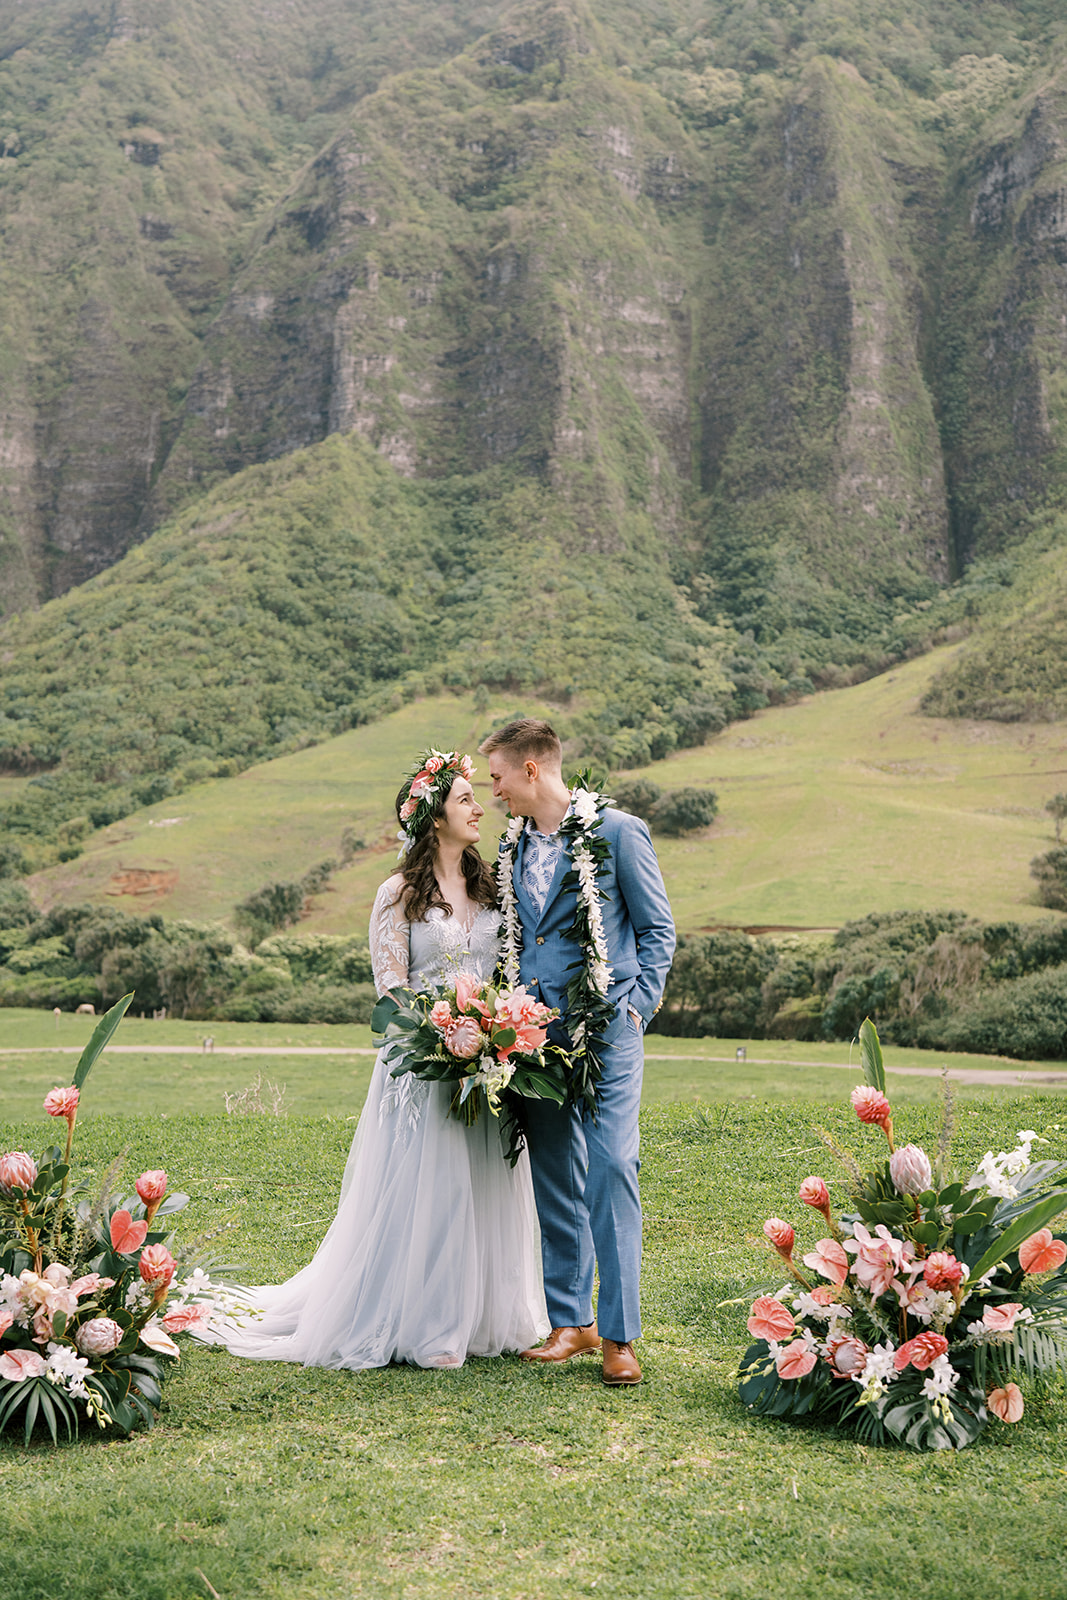 A man and woman in wedding attire standing in front of a mountain at a Kualoa Ranch Wedding.